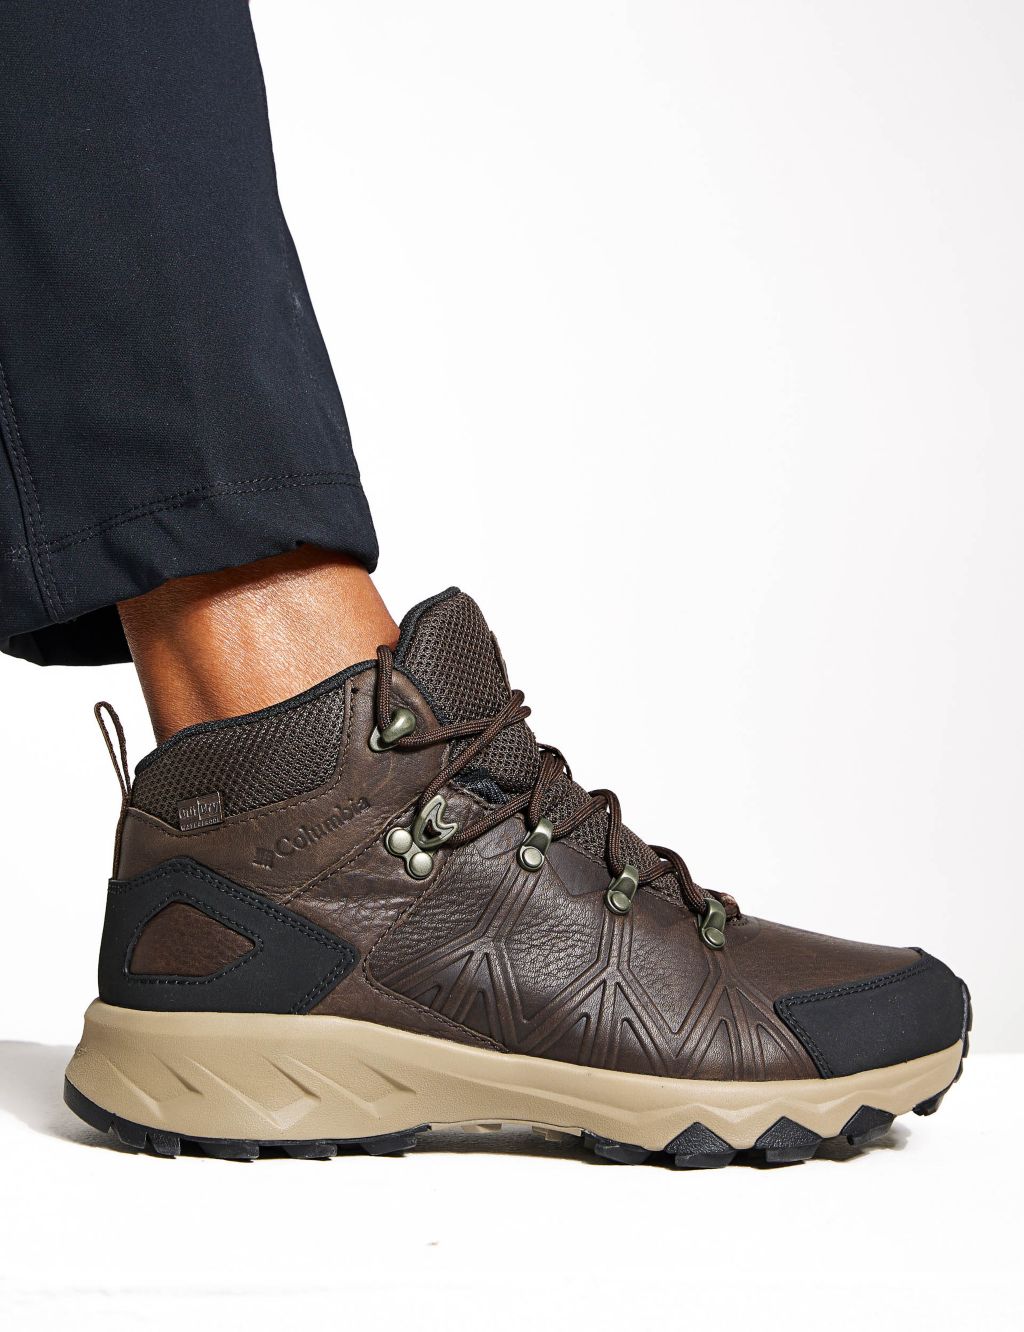 Peakfreak II Mid Outdry Leather Shoes image 8